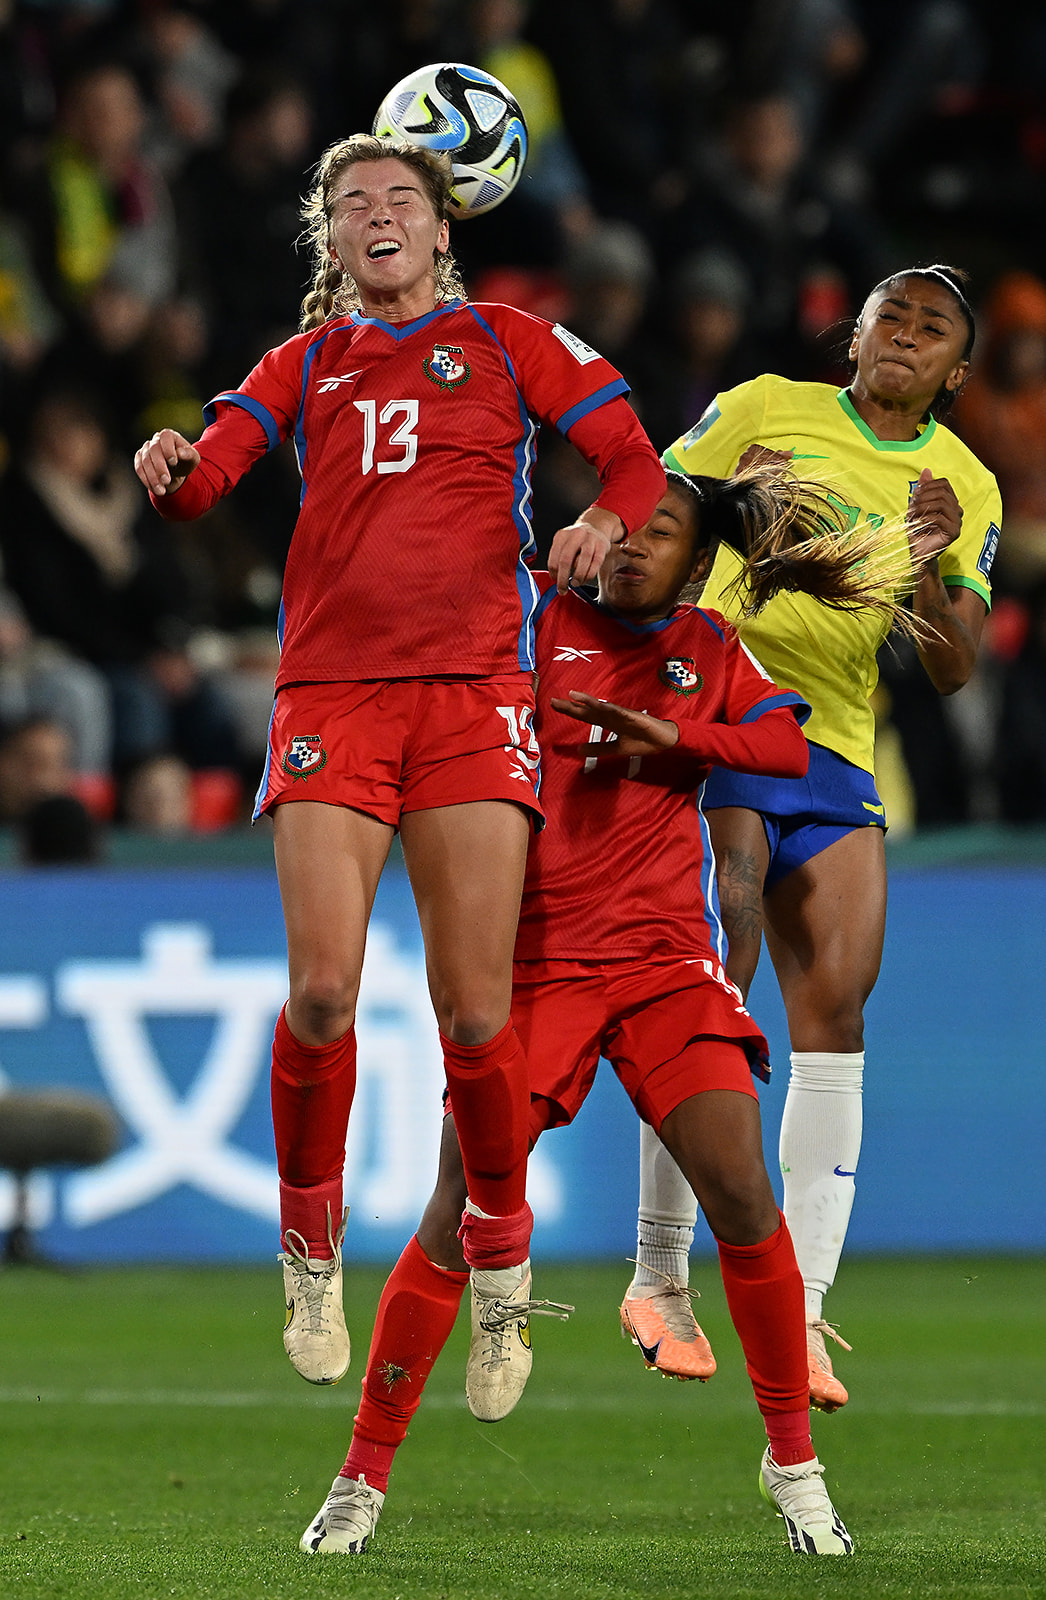 Riley Tanner of Panama heads the ball during the FIFA Women's World Cup Australia & New Zealand 2023.